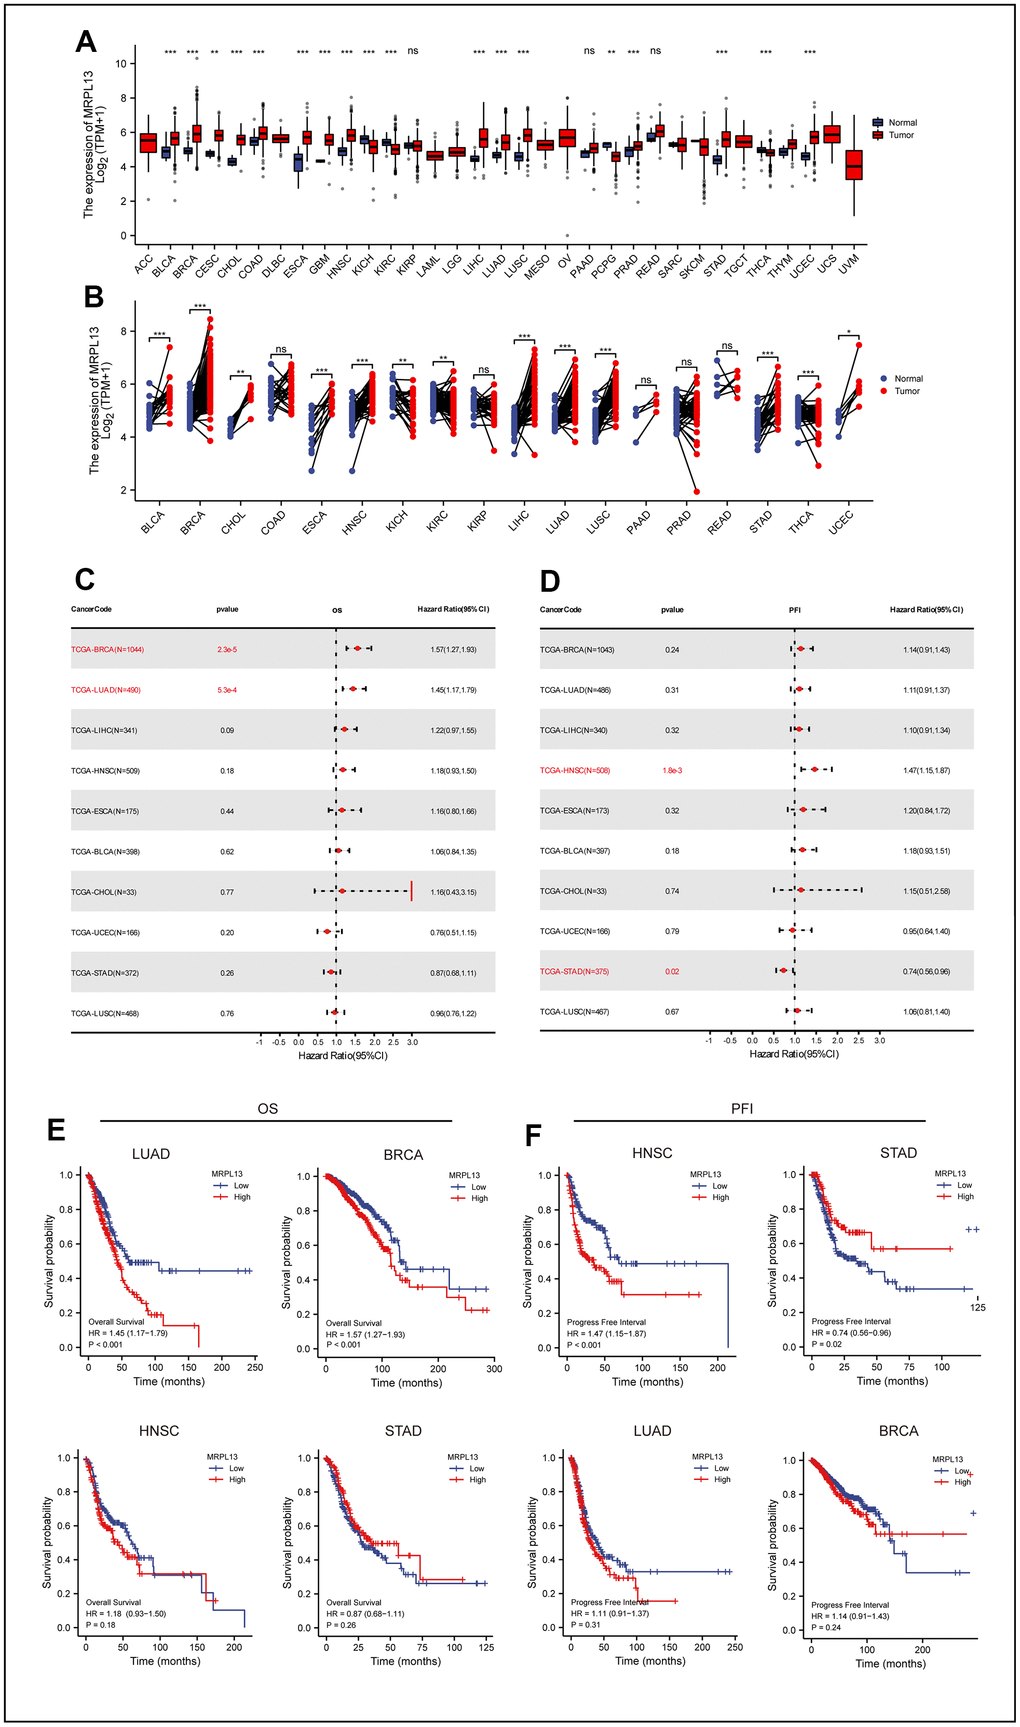 Differential expression of MRPL13 in pan-cancer and the relationship between MRPL13 expression and prognosis of pan-cancer. (A) Comparison of MRPL13 expression between tumor and normal samples. (B) Comparison of MRPL13 expression between tumor and paired normal samples. (C) Forest plot of OS associations in 33 types of tumors. (D) Forest plot of PFI associations in 33 types of tumors. (E, F) Kaplan–Meier analysis of the association between MRPL13 expression and OS/PFI. *p 